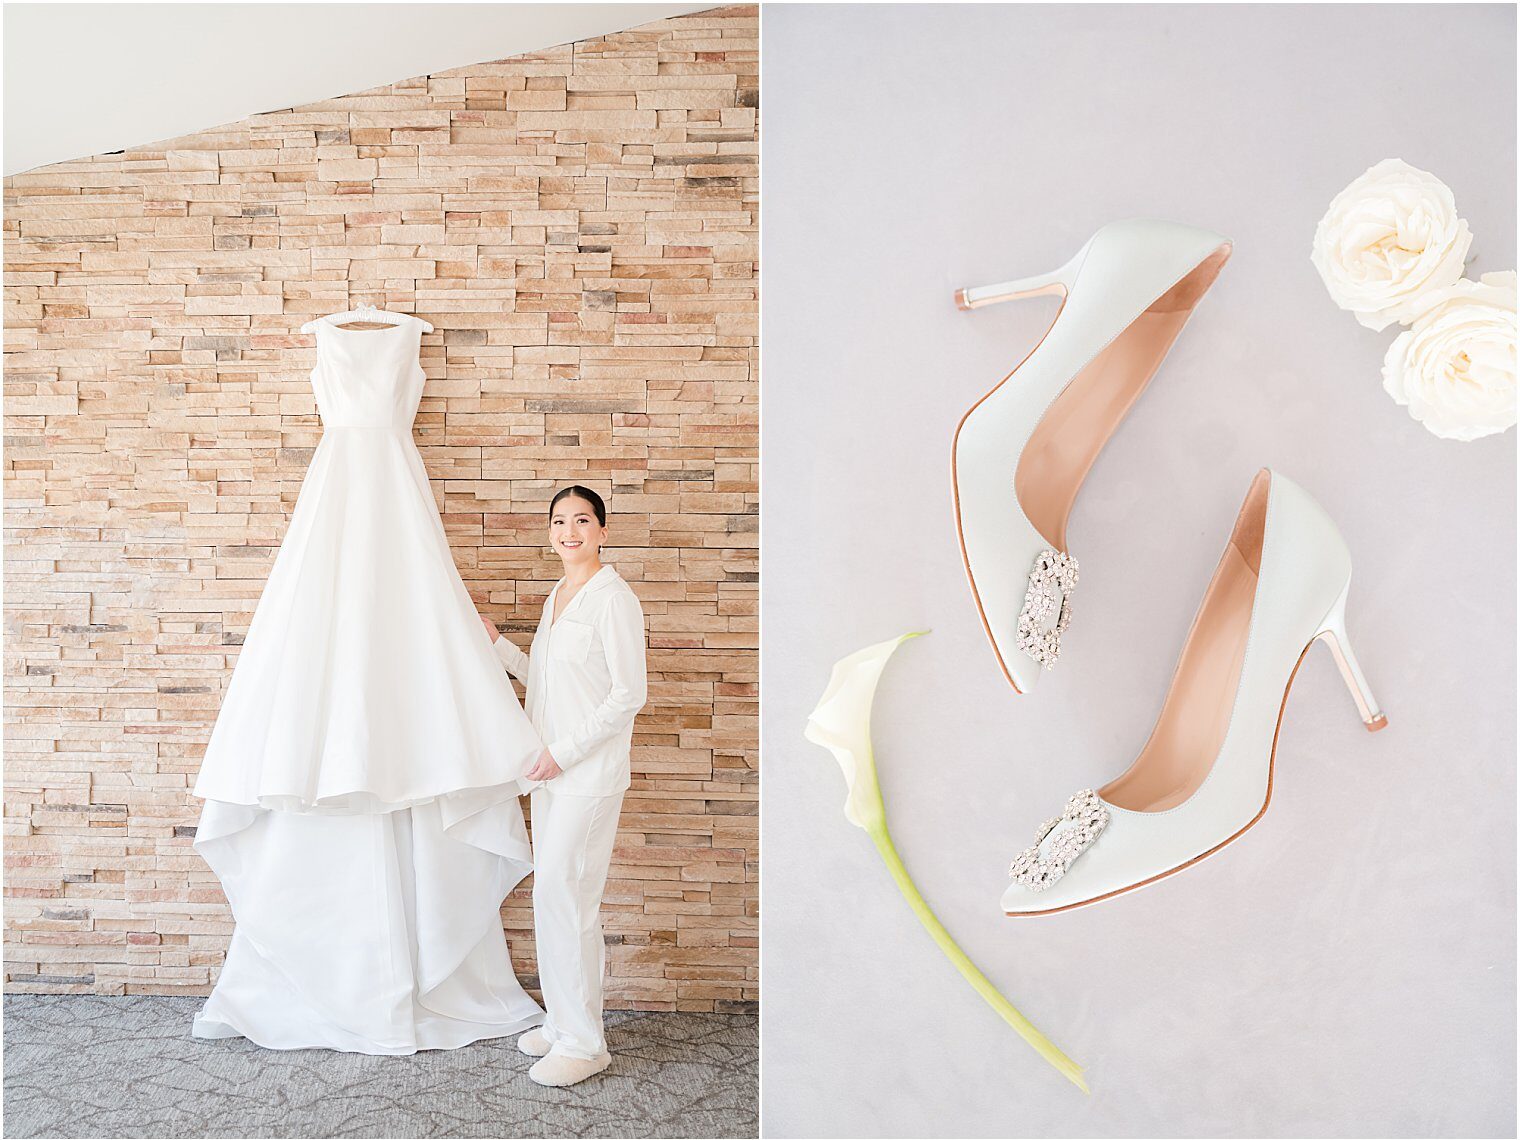 Bride with her dress and shoes for the wedding of her dreams